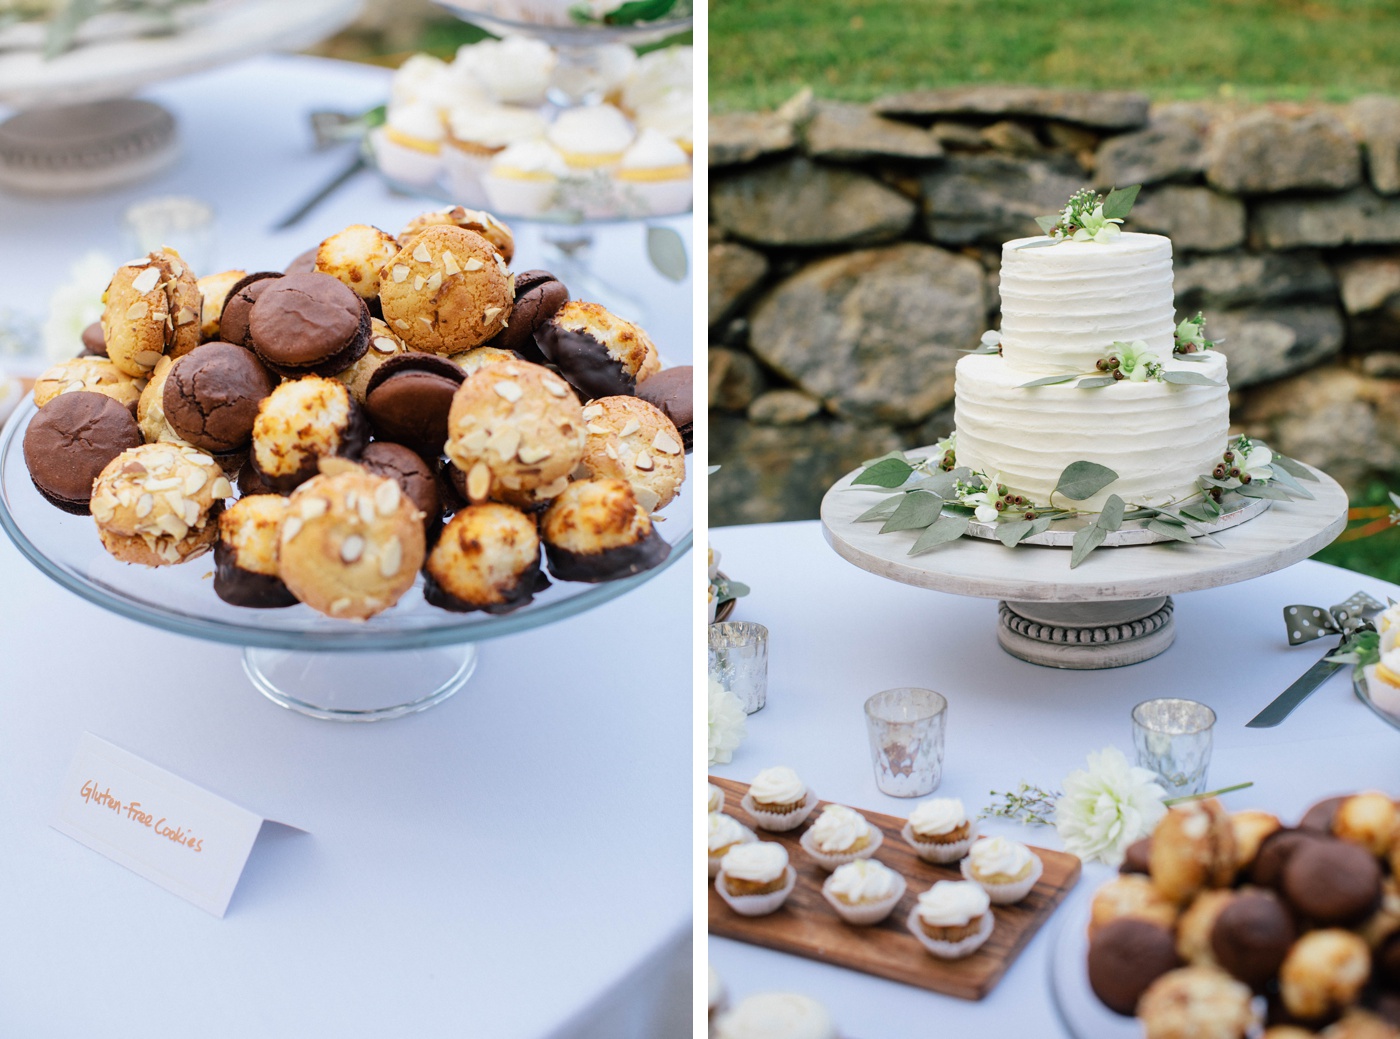 Wedding dessert table with cupcakes and gluten-free cookies